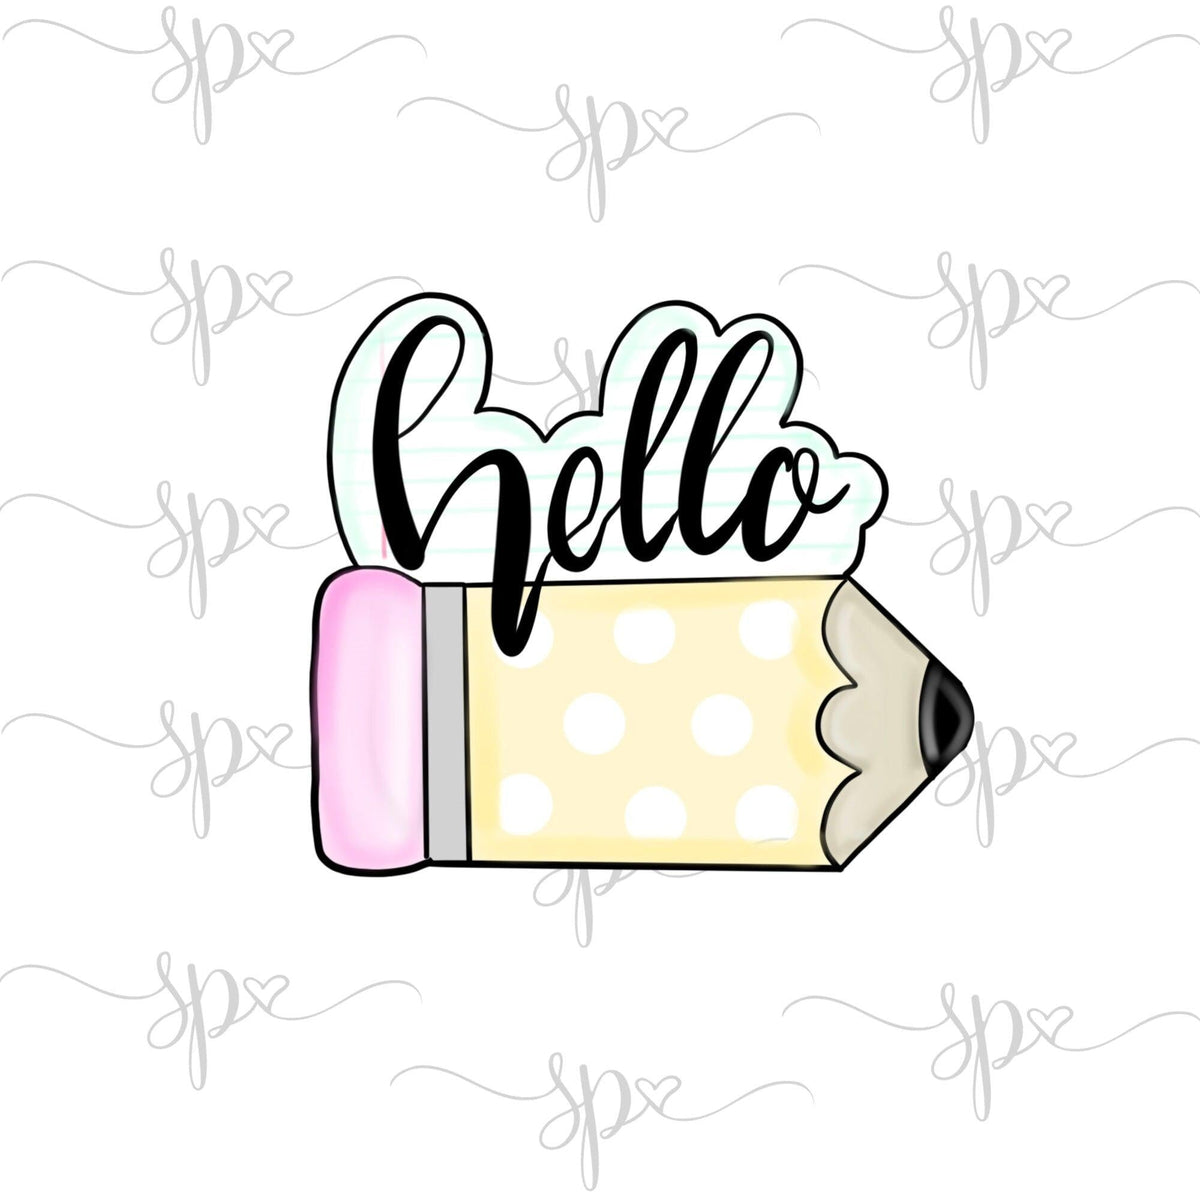 Hello Pencil Cookie Cutter - Sweetleigh 